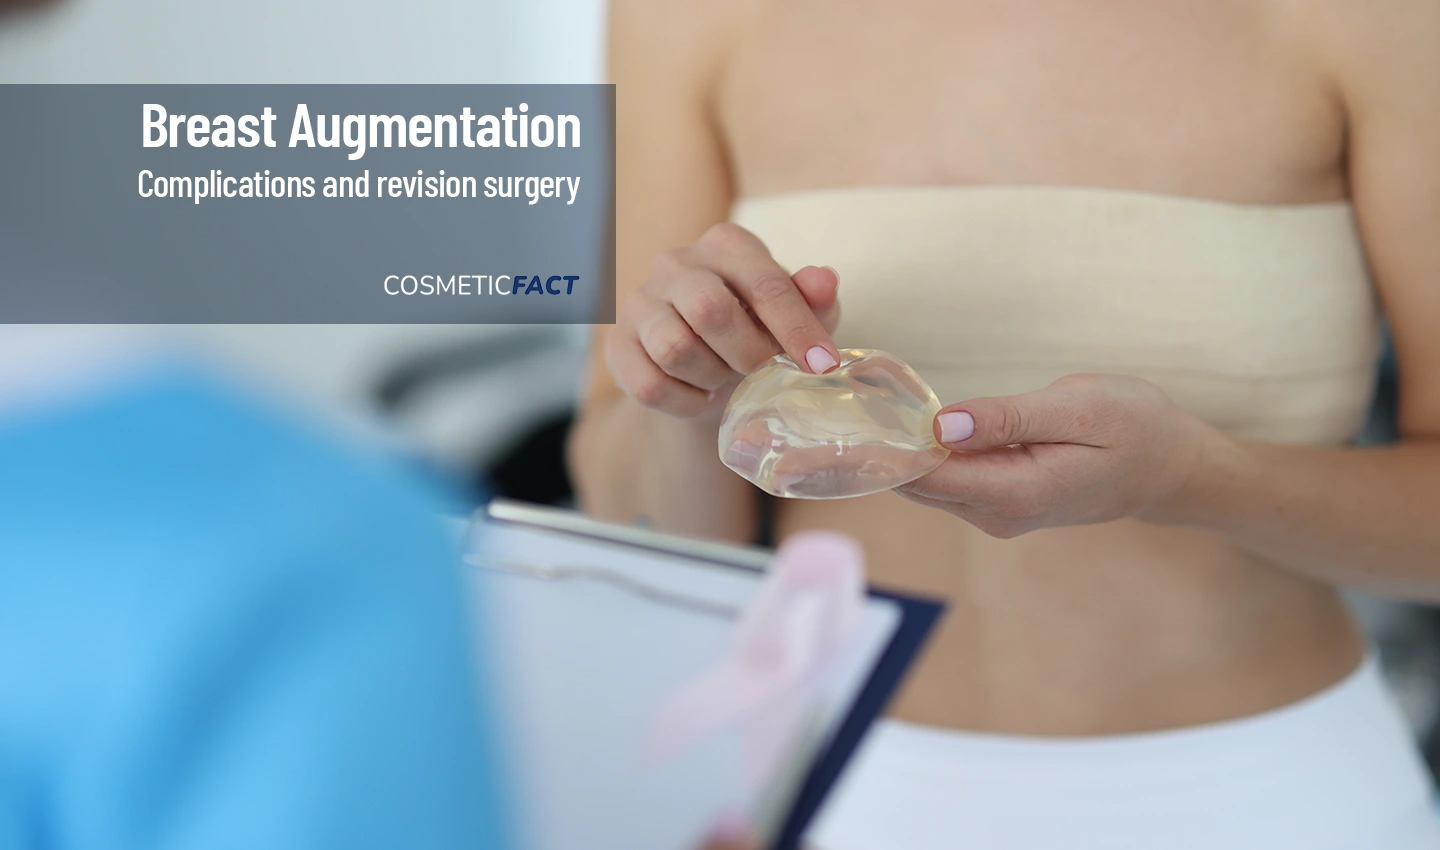 Woman holding breast prosthesis, considering breast augmentation revision surgery.